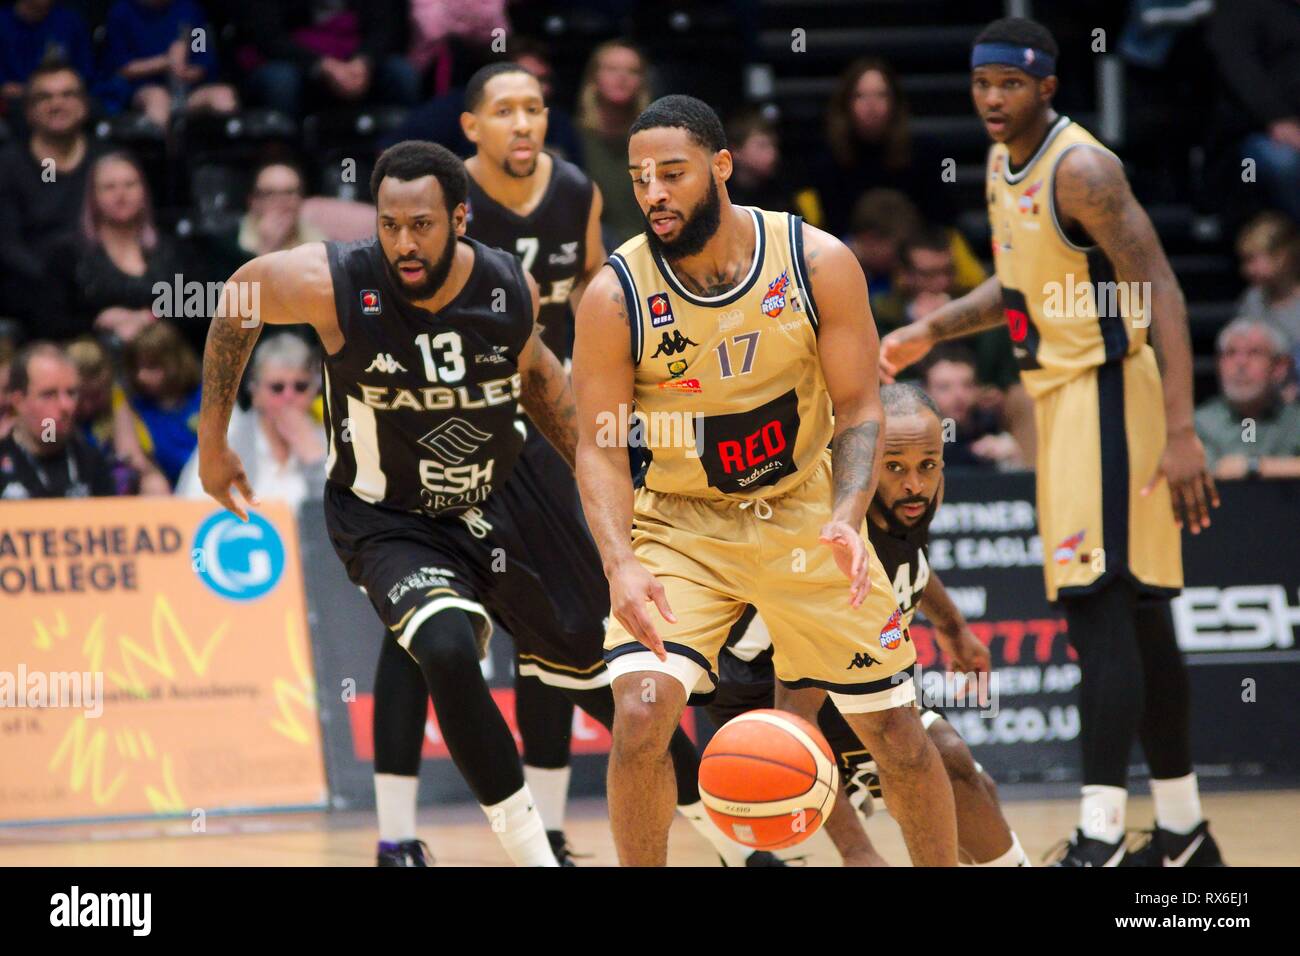 Newcastle upon Tyne, UK.  08 March 2019. Greg Pryor, number 17, playing for Radisson RED Glasgow Rocks against Esh Group Eagles Newcastle in the British Basketball League championship match at the Eagles Community Arena in Newcastle upon Tyne. Darius Defoe is the Newcastle player chasing him. Credit: Colin Edwards/Alamy Live News. Stock Photo